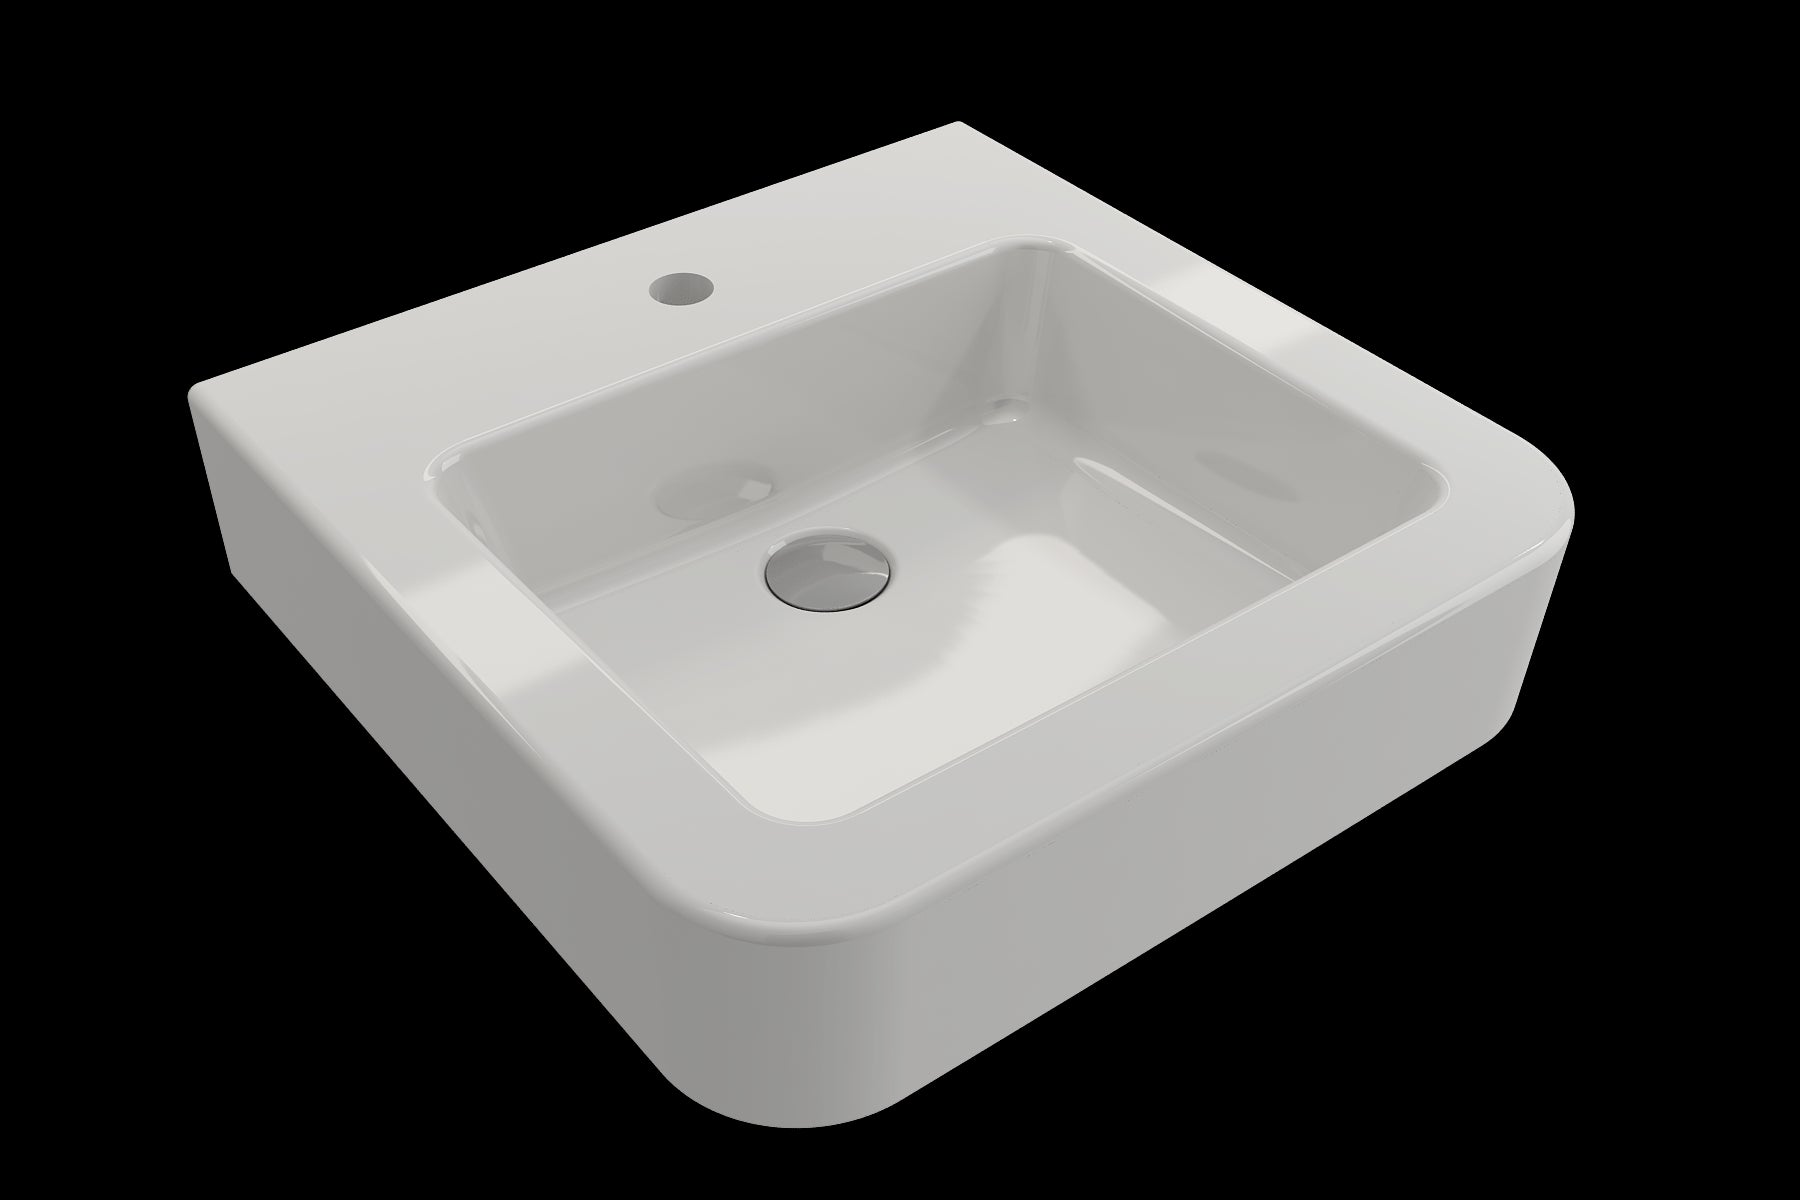 BOCCHI PARMA 19.75" Wall-Mounted Sink Fireclay in. 1-Hole With Overflow